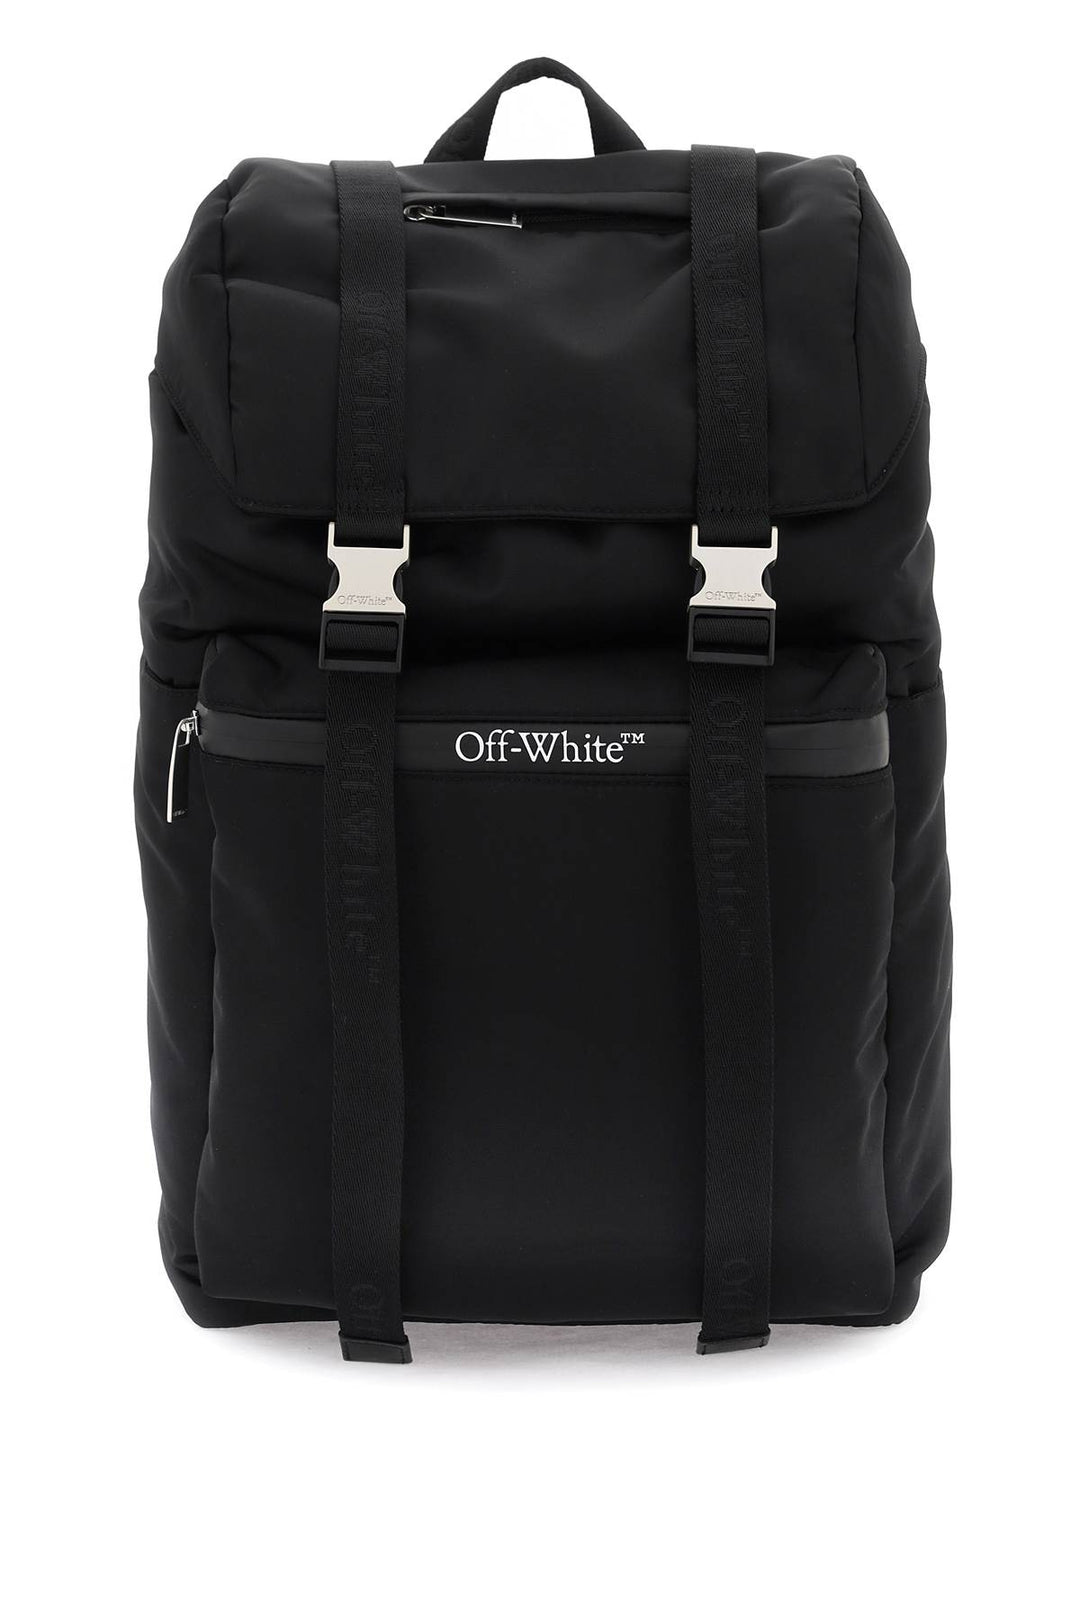 Off White Outdoor Backpack   Nero